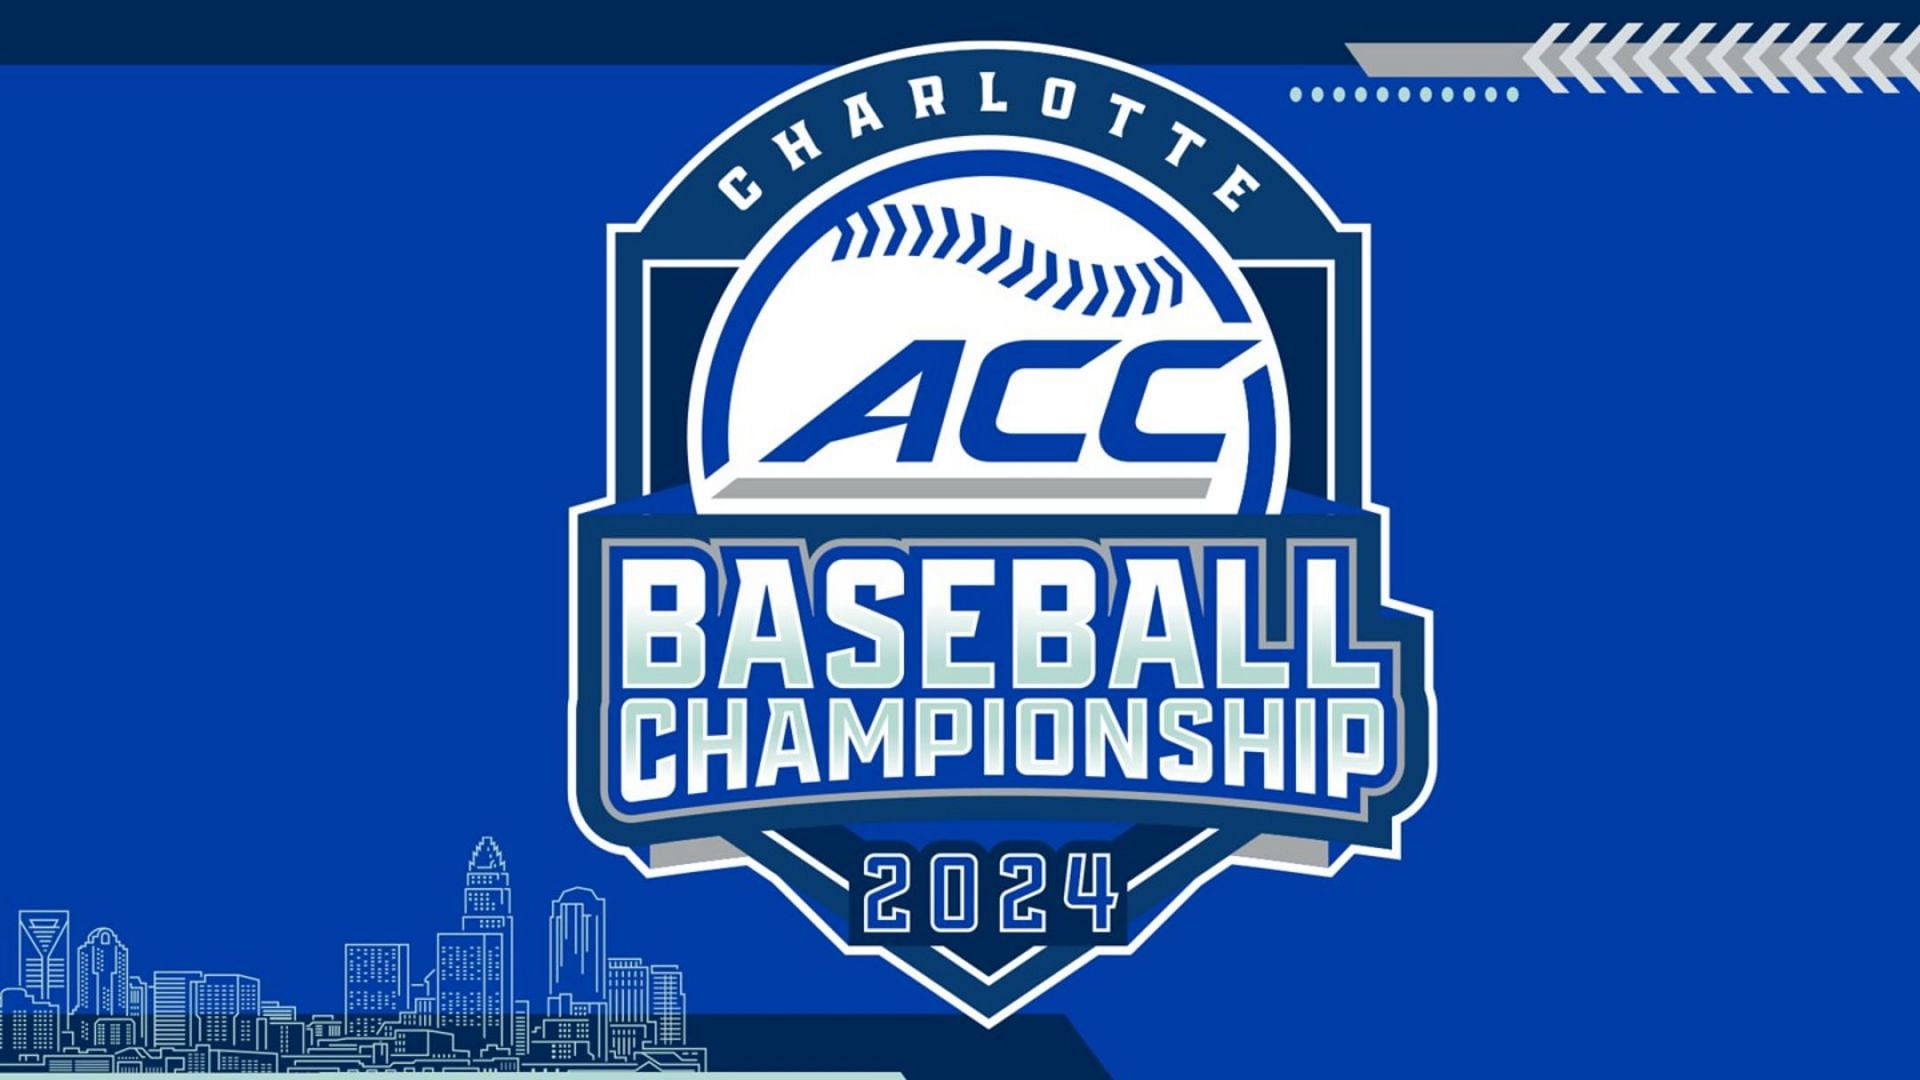 The ACC Baseball Tournament is scheduled on May 21-26 in Charlotte, North Carolina.